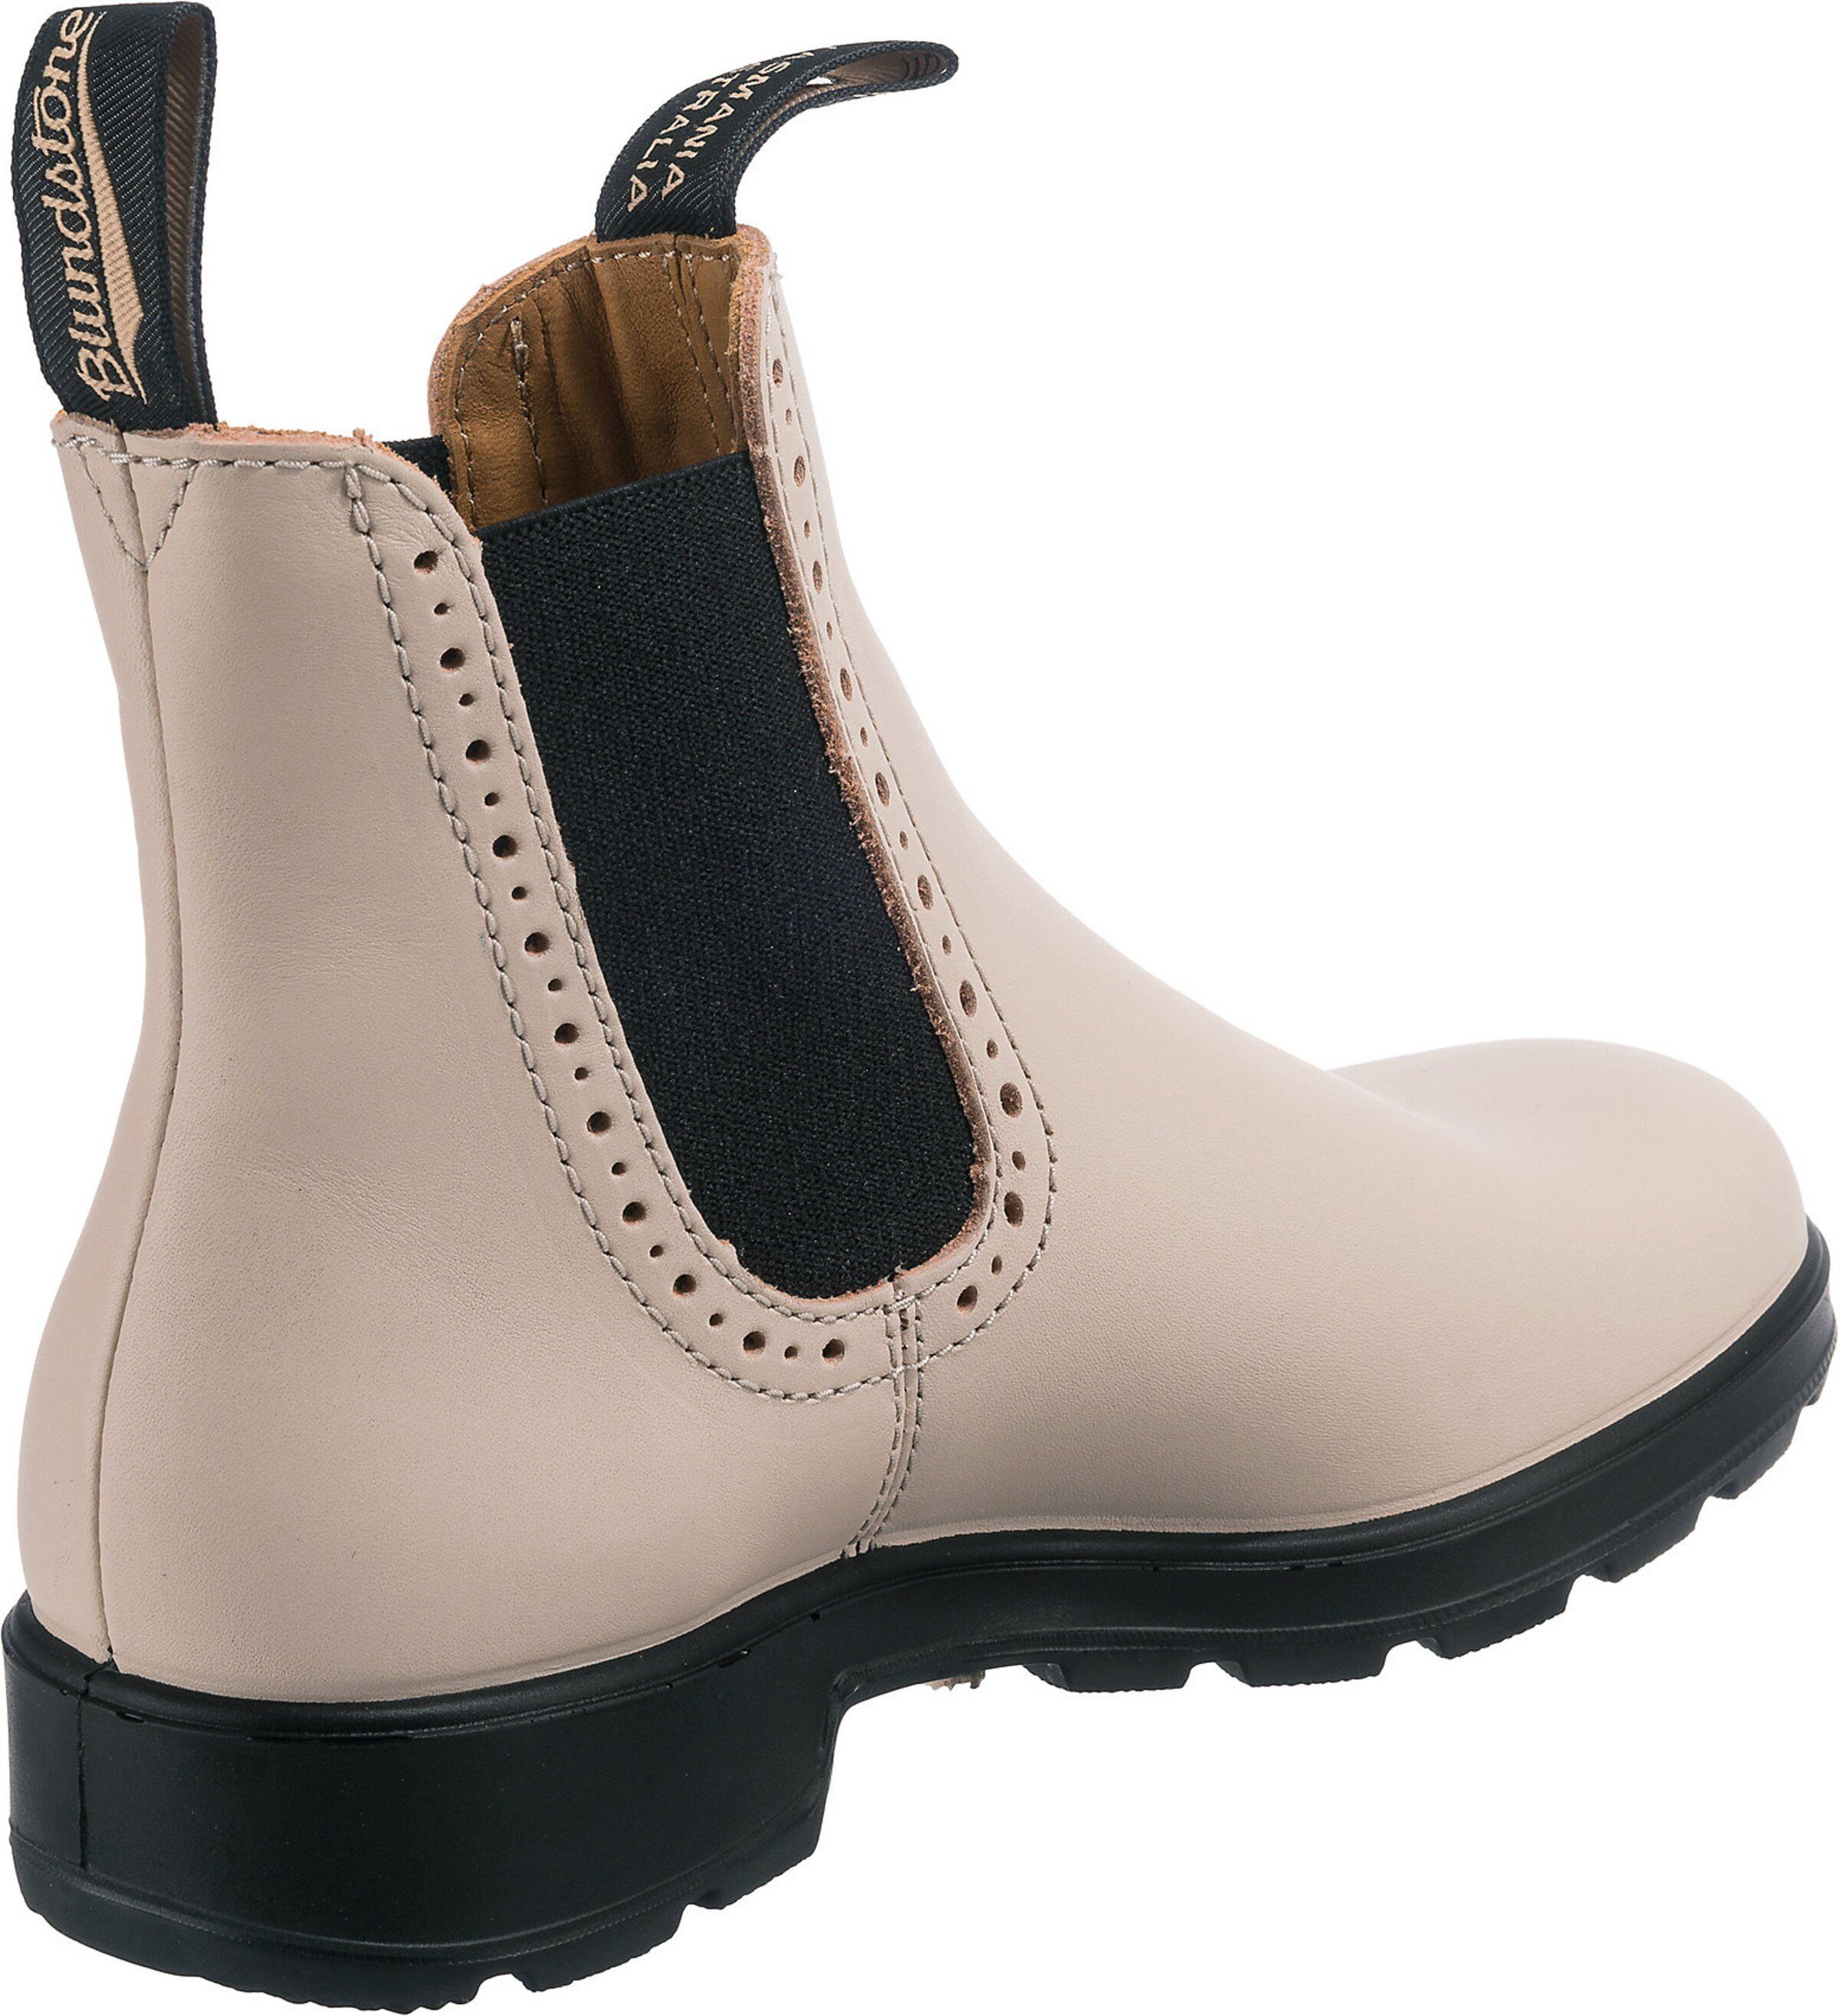 Blundstone Chelseaboots (1-tlg)